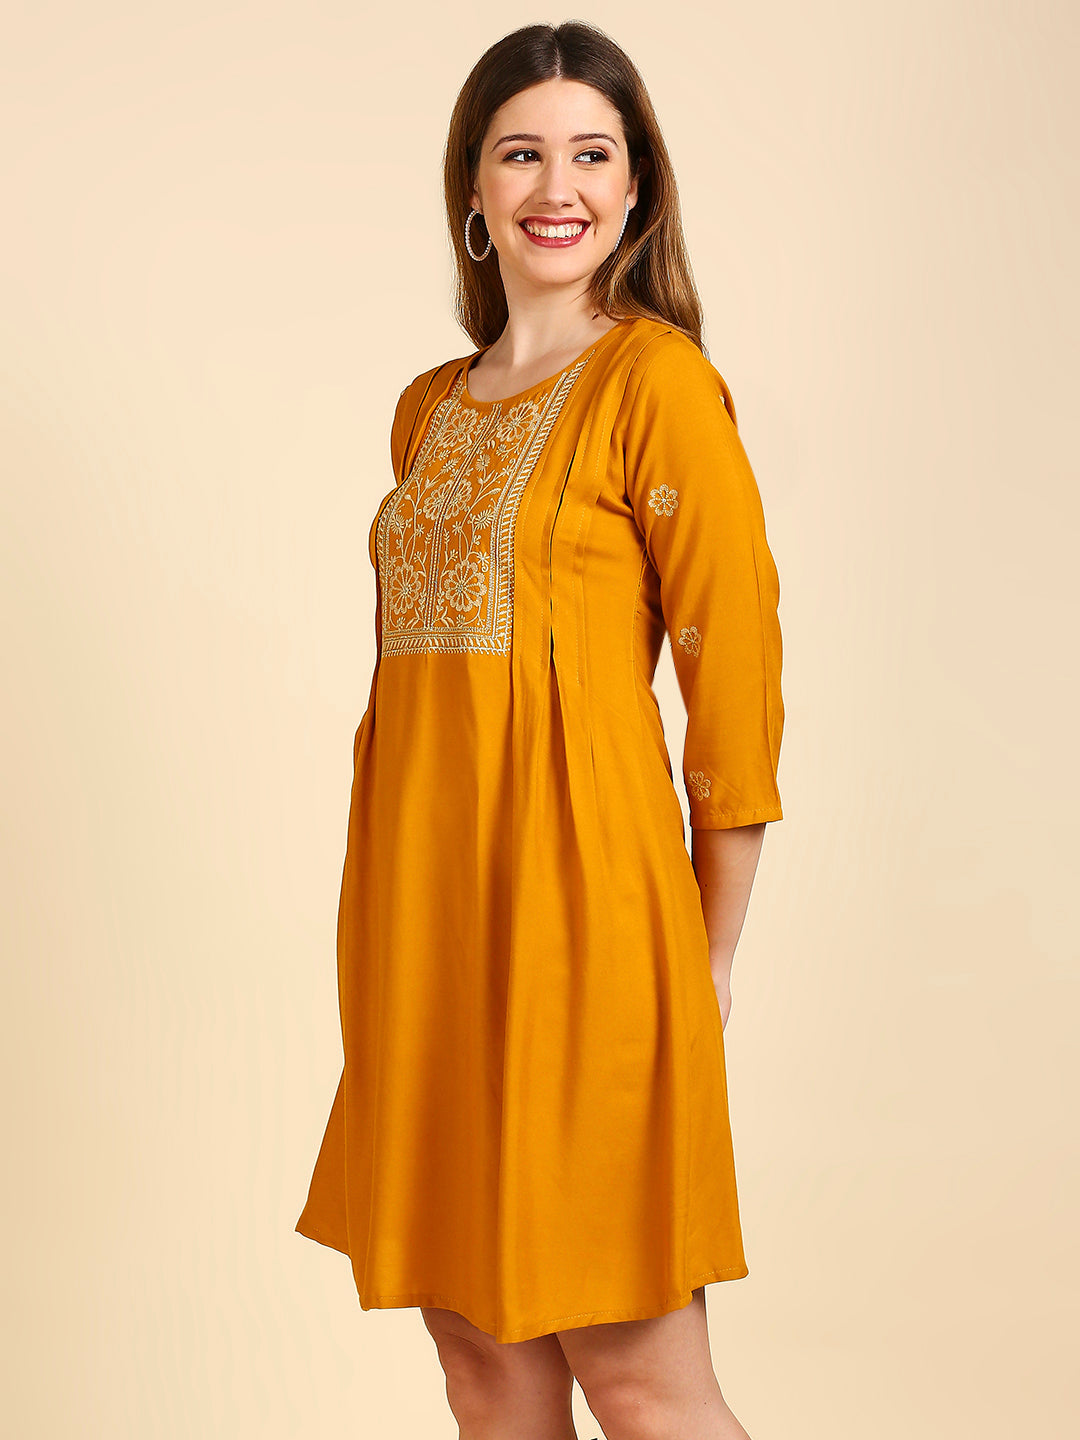 Women's's Mustard Yellow Ethnic Motifs Embroidered A-Line Dress